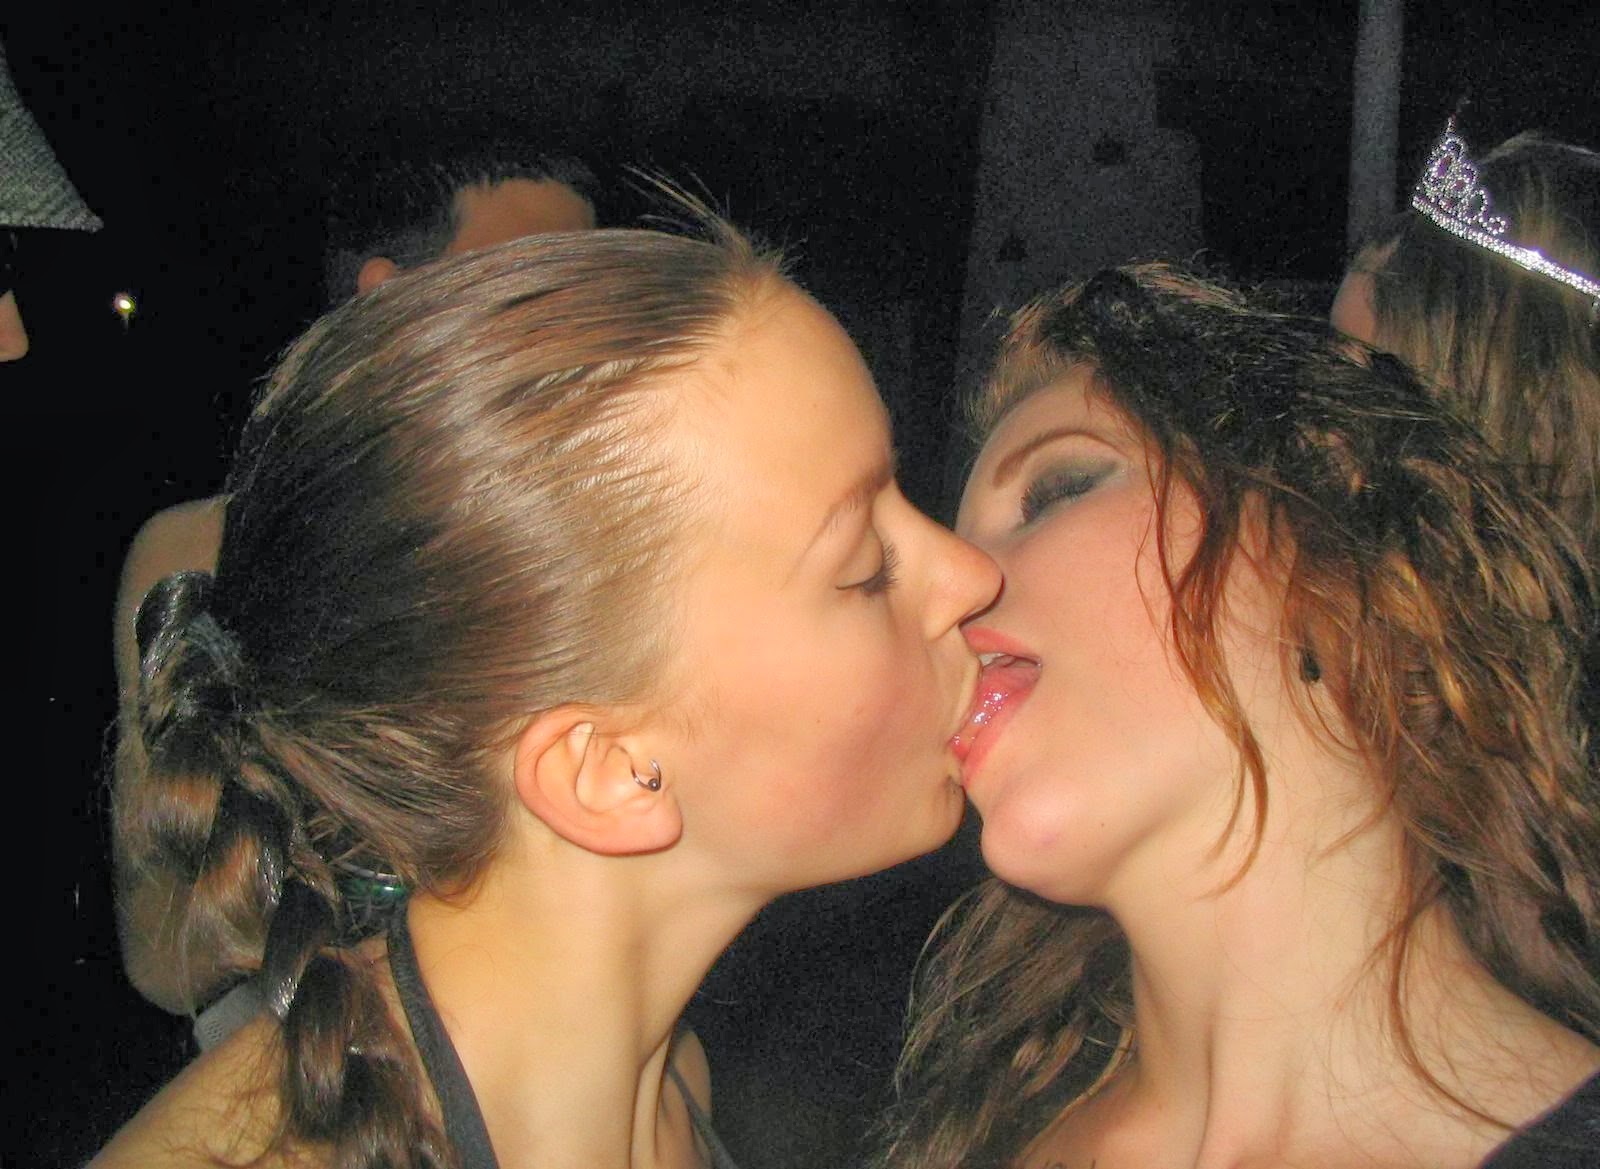 Sexy college chicks enjoy kissing each other